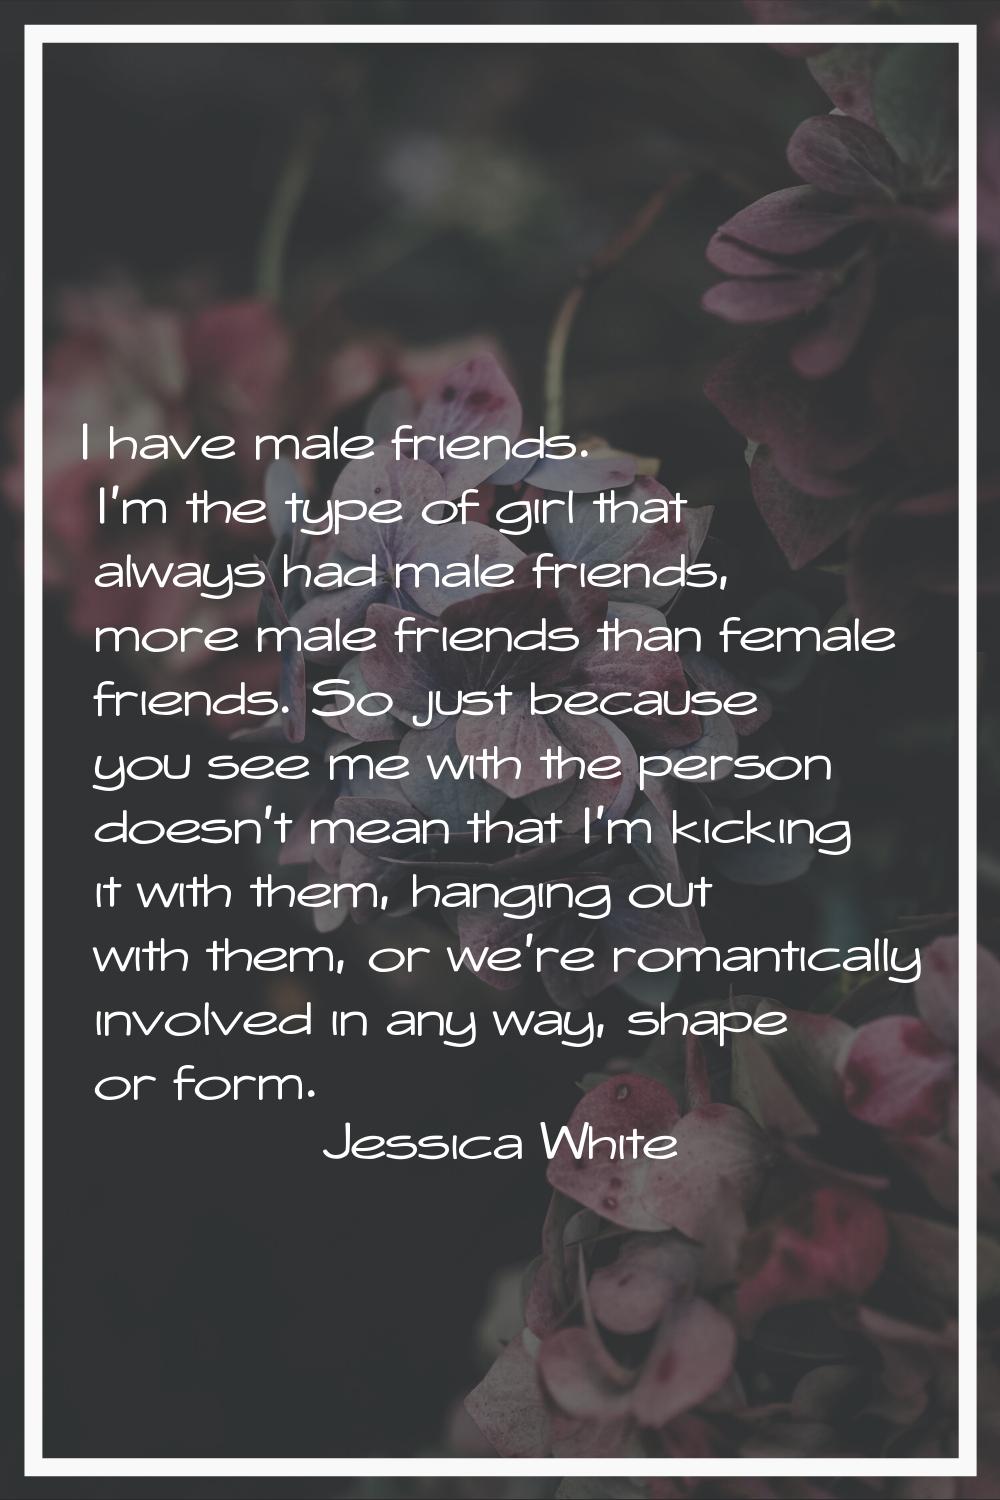 I have male friends. I'm the type of girl that always had male friends, more male friends than fema